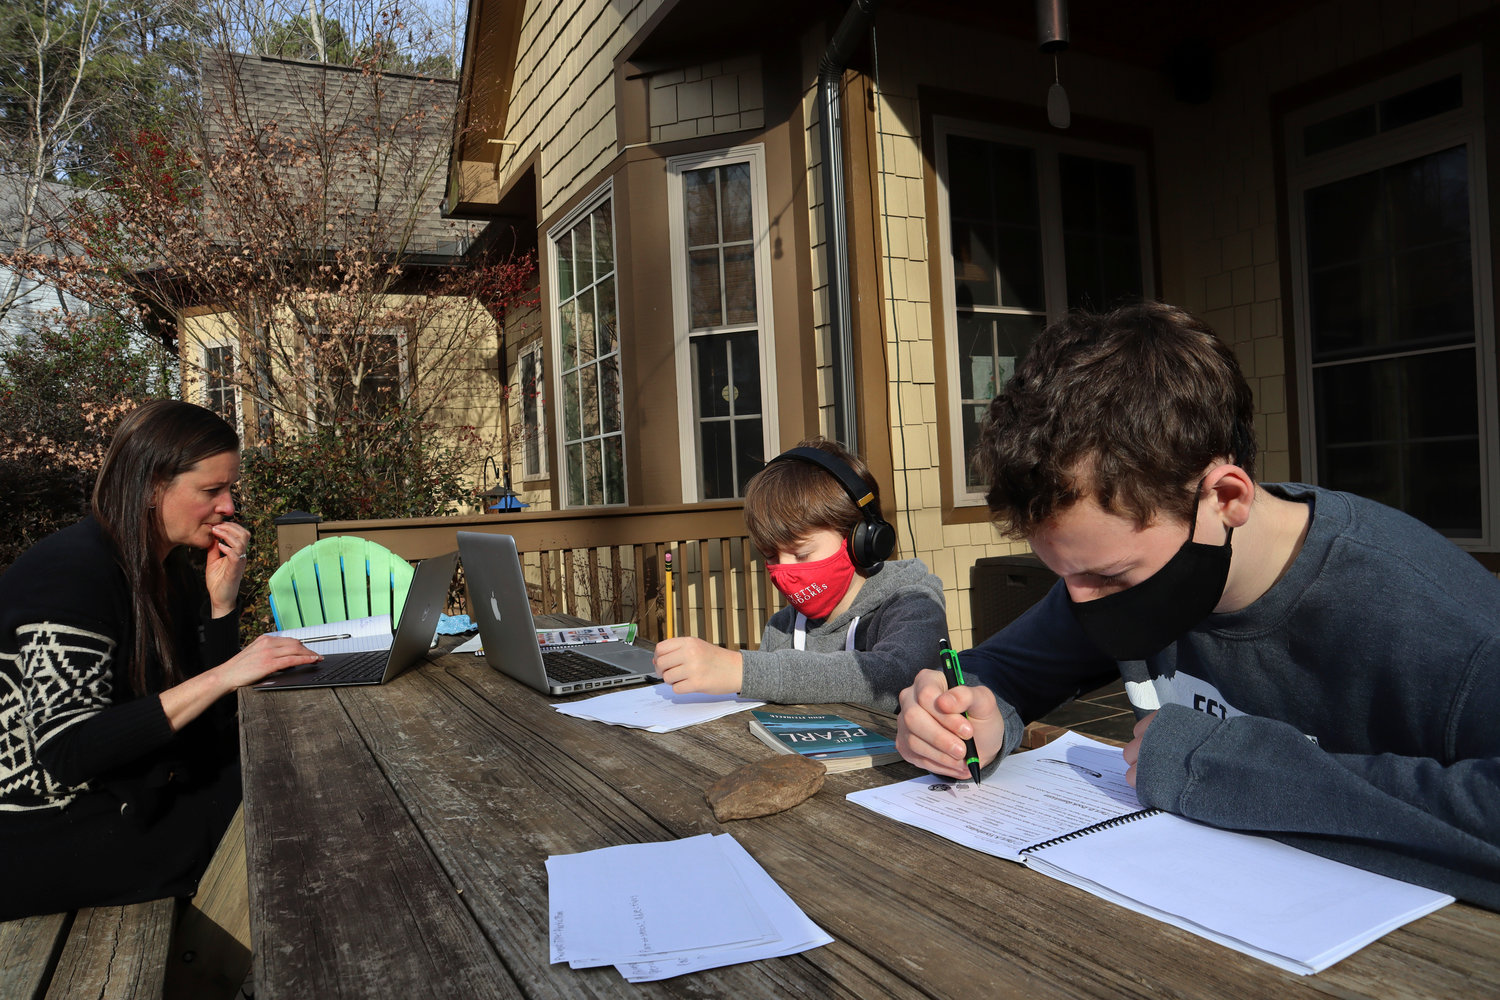 STUDY TIME — Angela Atkins works outside her home in Oxford, Miss., on Friday, Dec. 18, while her two sons, Jess and Billy, focus on schoolwork. Atkins is home schooling her children for the first time this year while juggling her job in the development office at the University of Mississippi. Atkins said her job has allowed her to work from home while managing her children’s education.